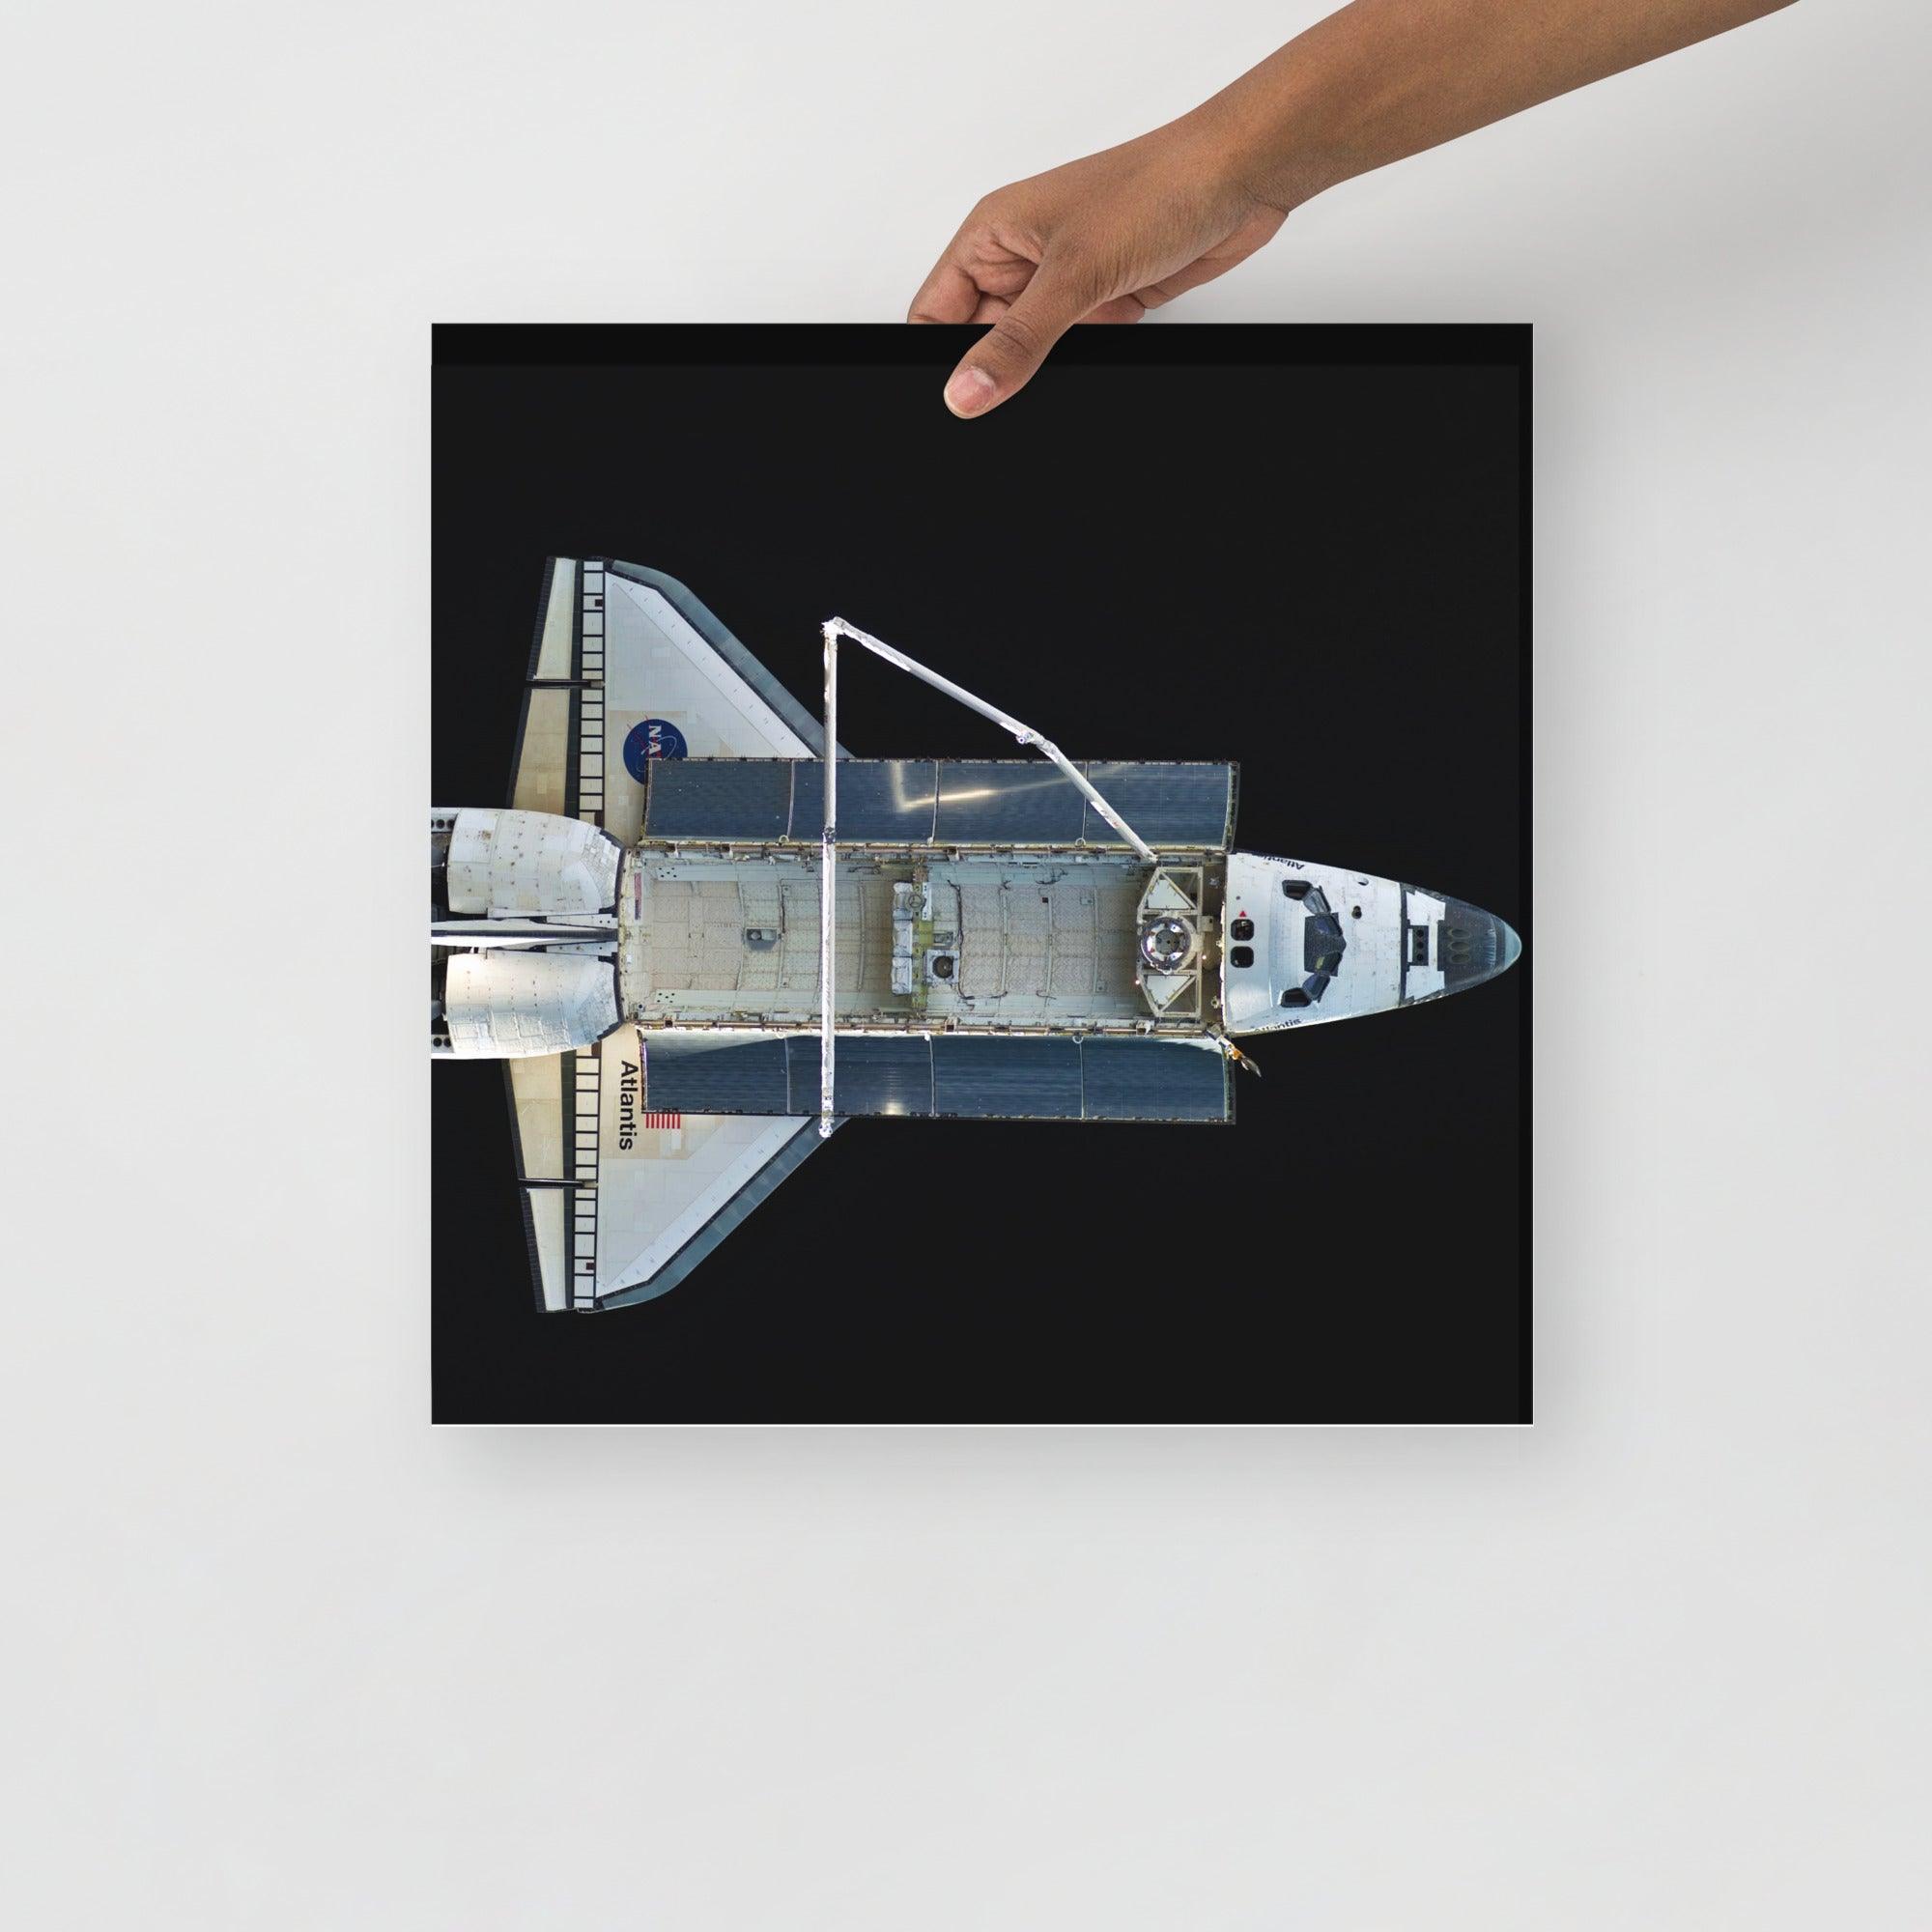 A Space Shuttle Atlantis poster on a plain backdrop in size 16x16”.